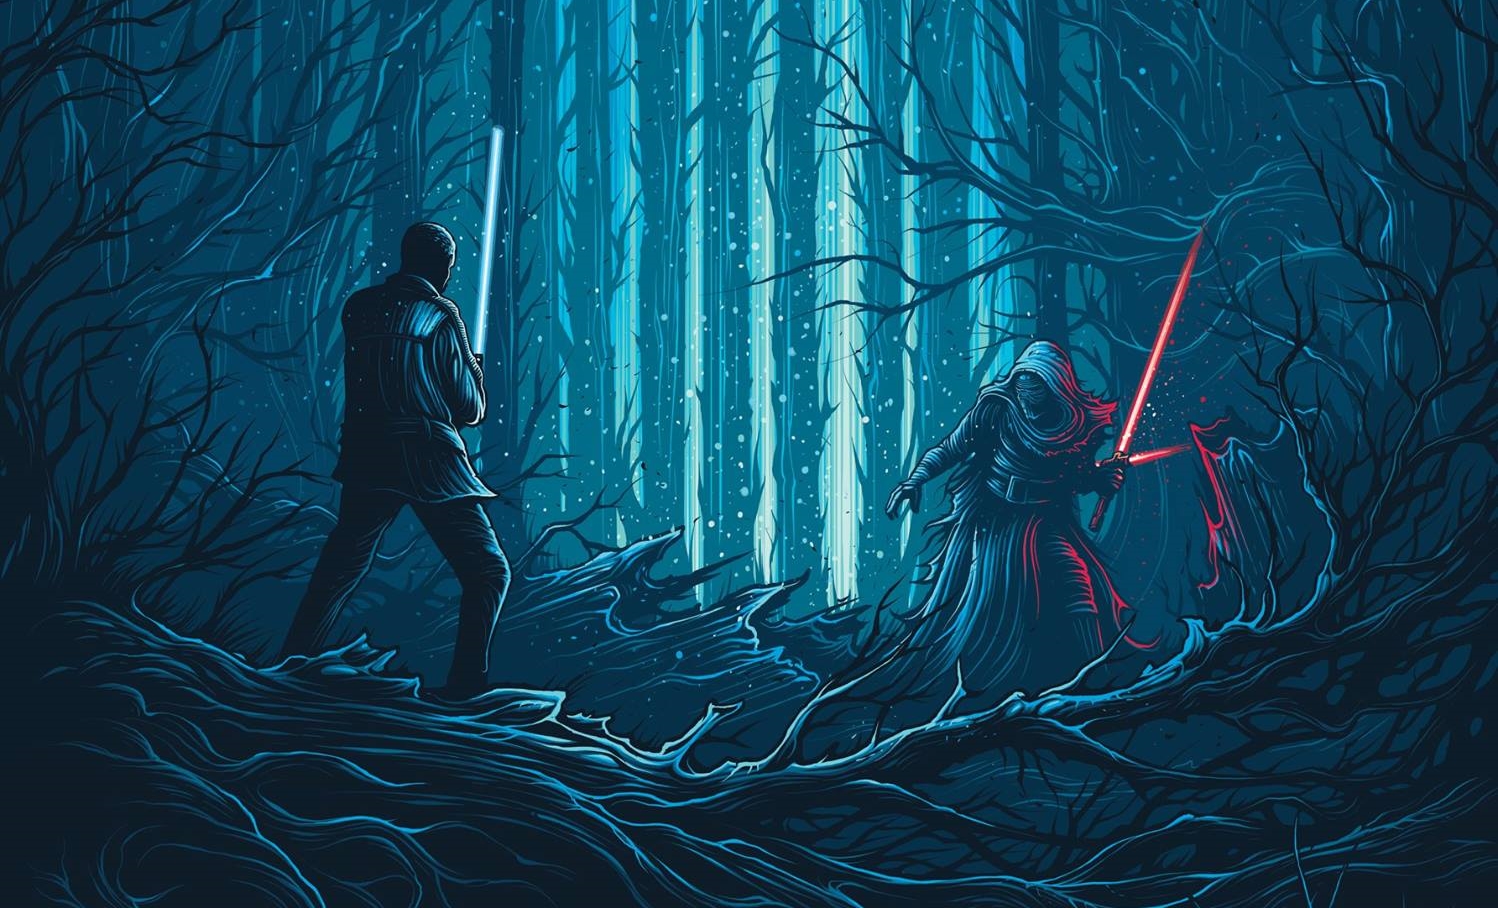 Amc Theatres Reveals Final Imax The Force Awakens Poster Star